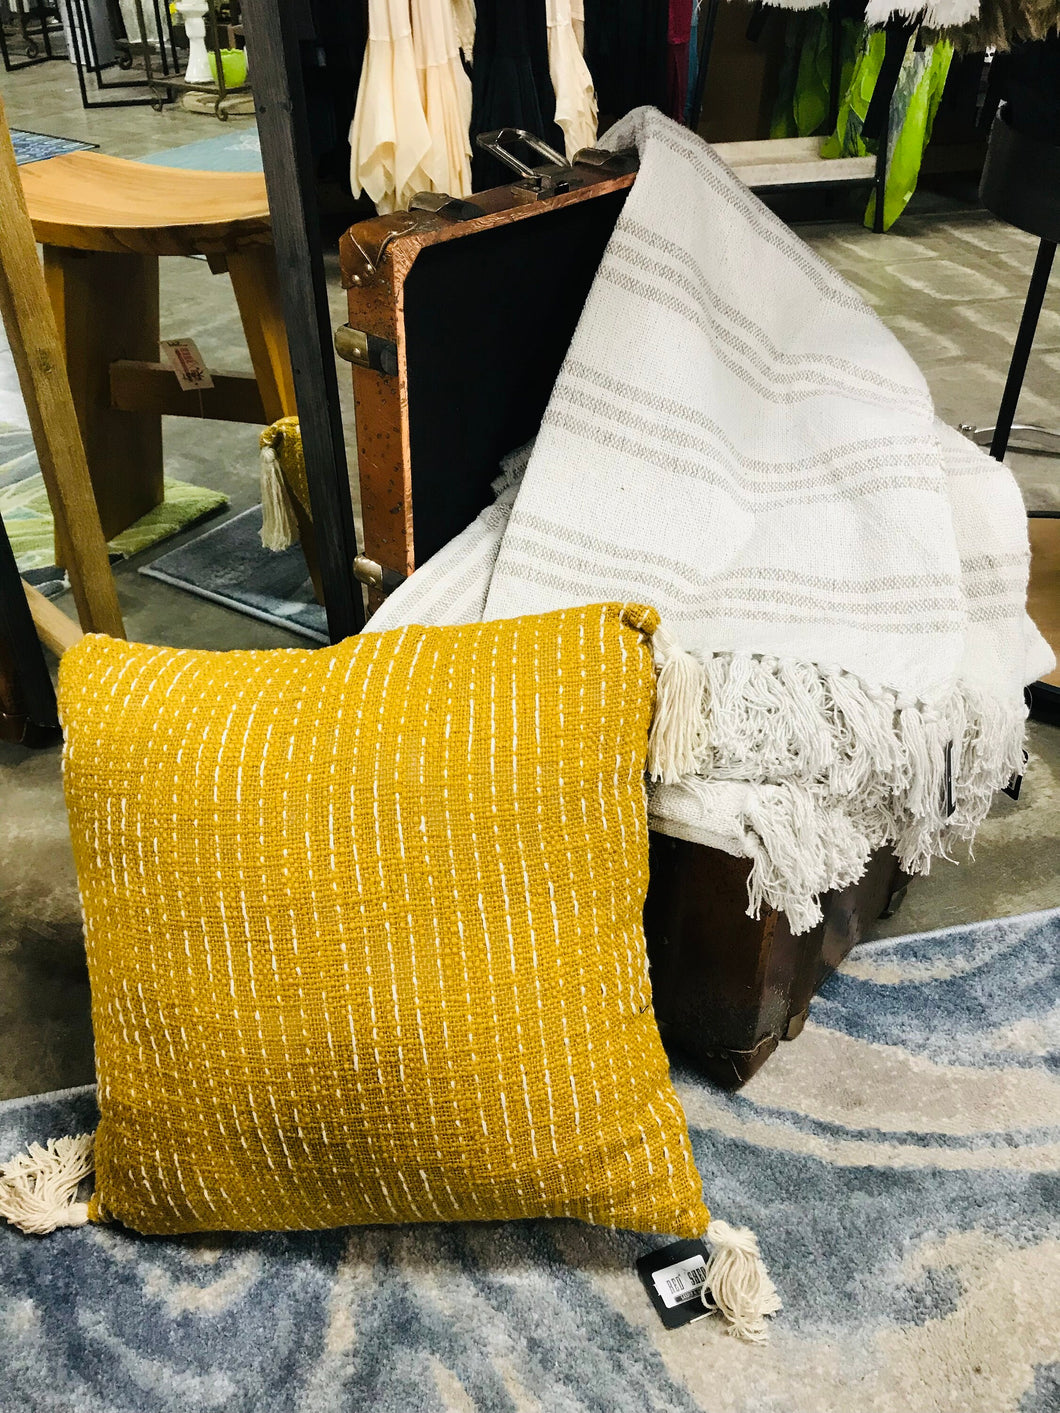 Mustard Yellow with cream tassels and stripes Accent Throw Pillow